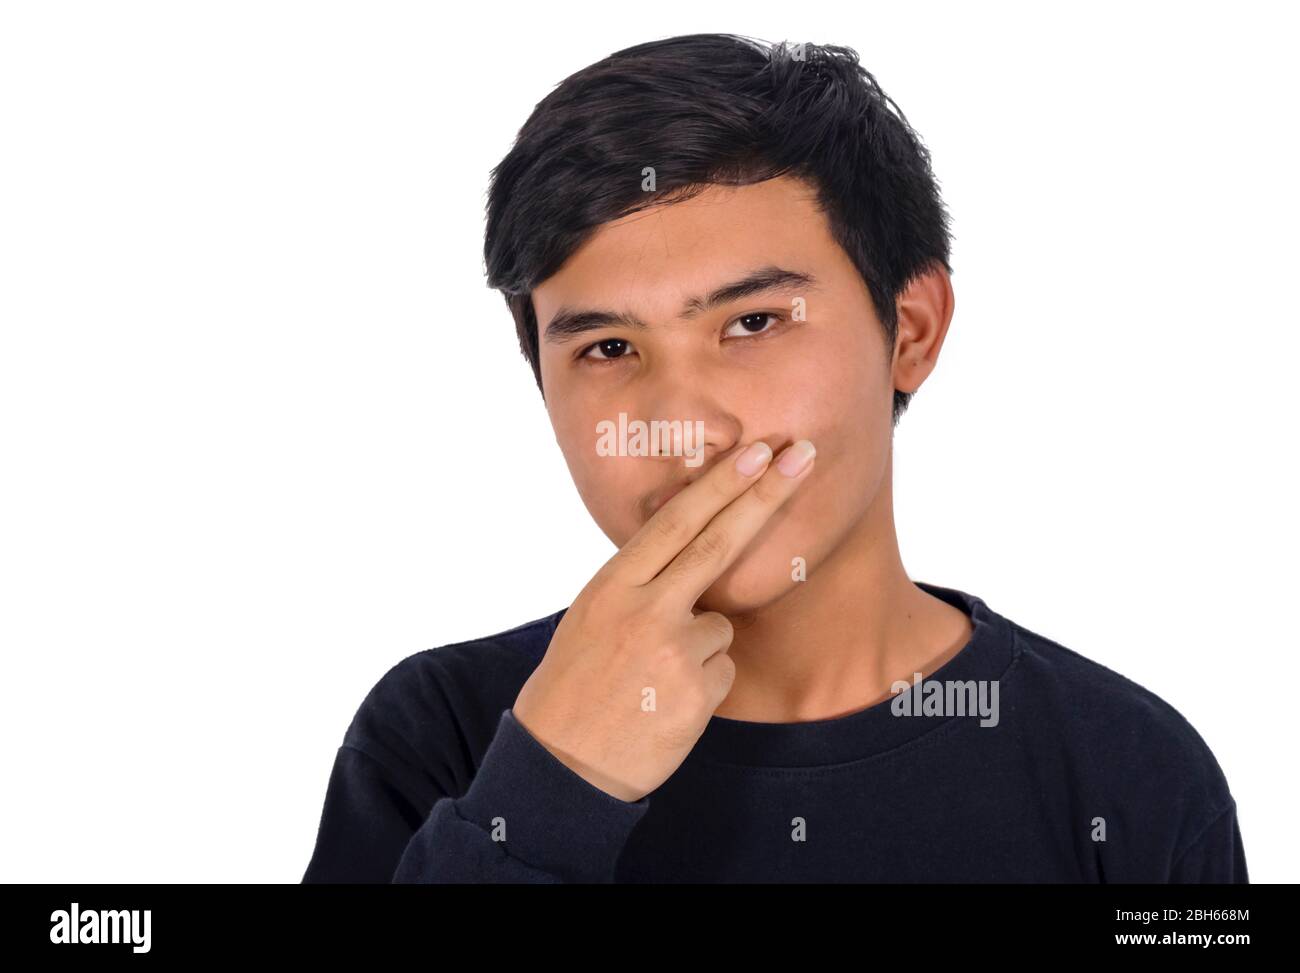 The photo of a boy closes his mouth with his two fingers points to the copy space Stock Photo